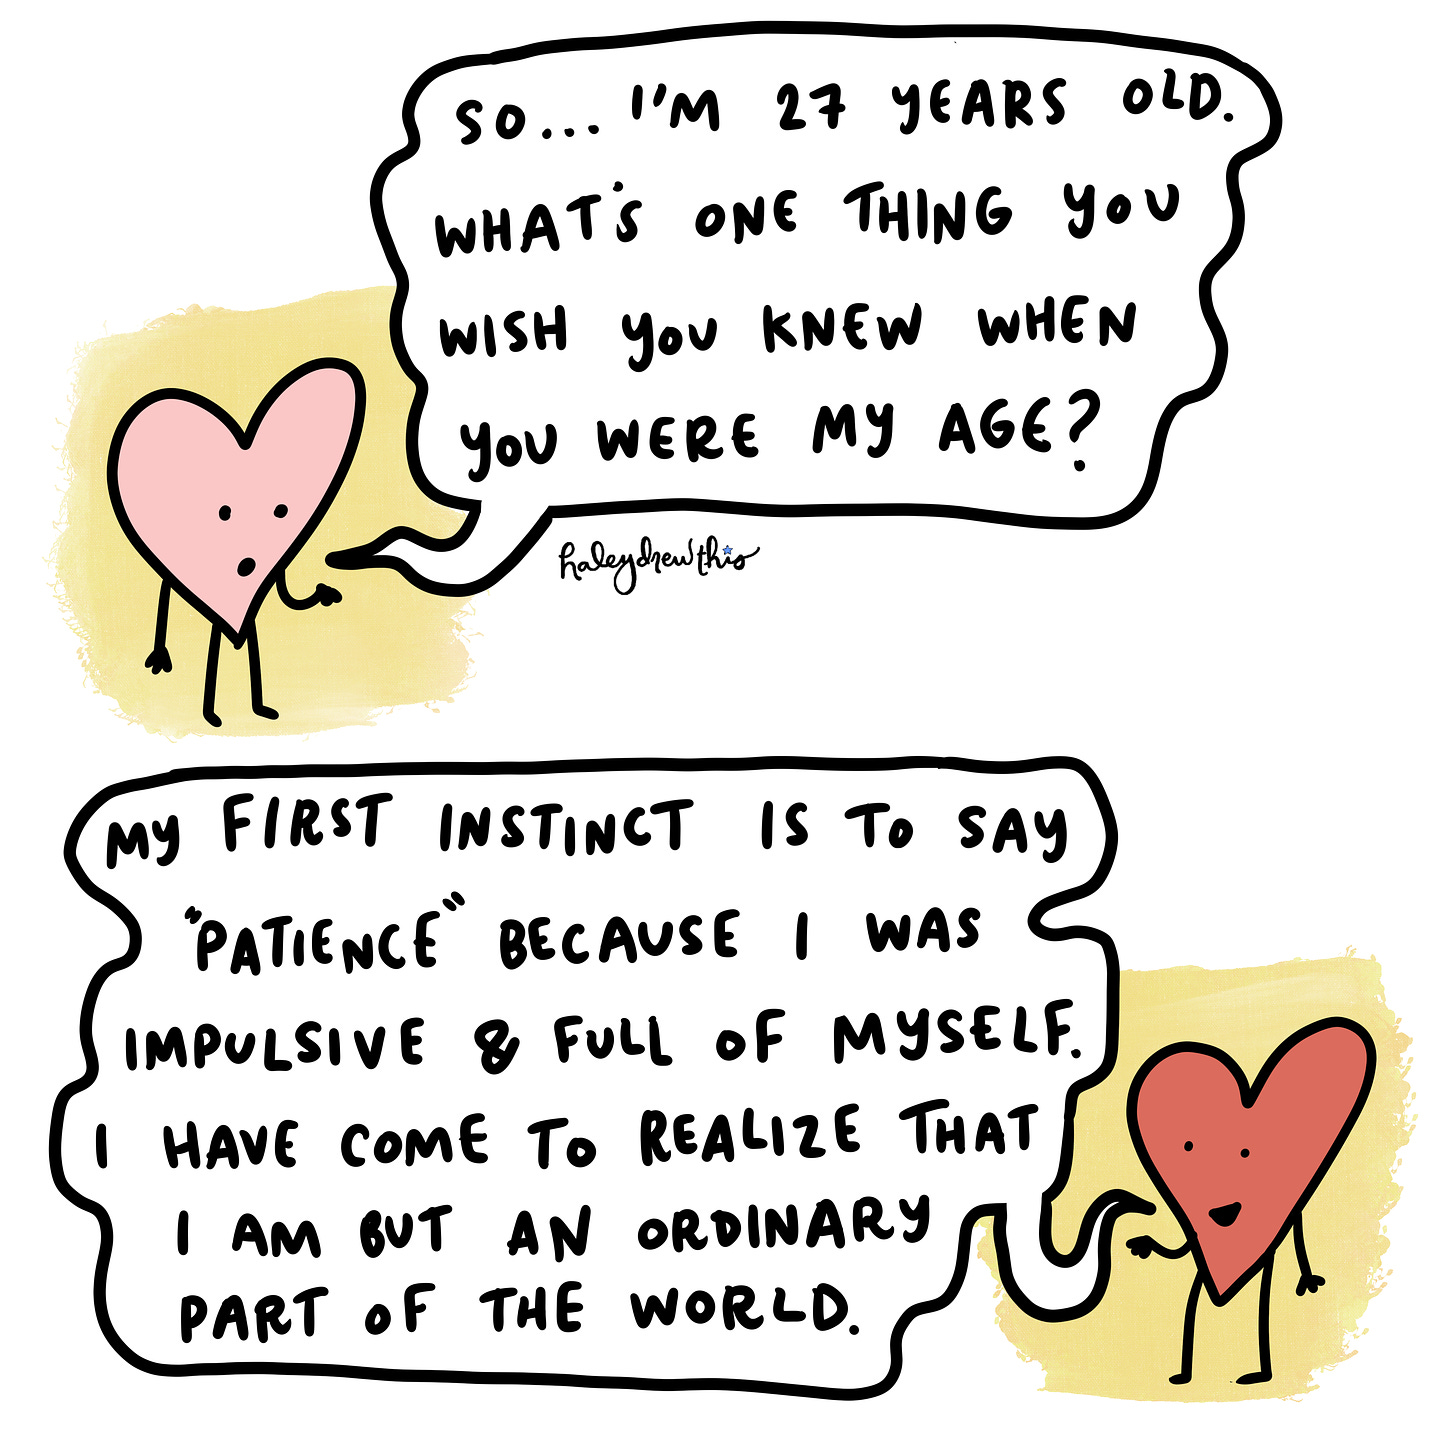 Illustration of hearts asking and answering: What is one thing you wish you knew when you were 27? My first instinct is to say patience because I was impulsive and full of myself.  I have come to realize that I am but an ordinary part of the world.